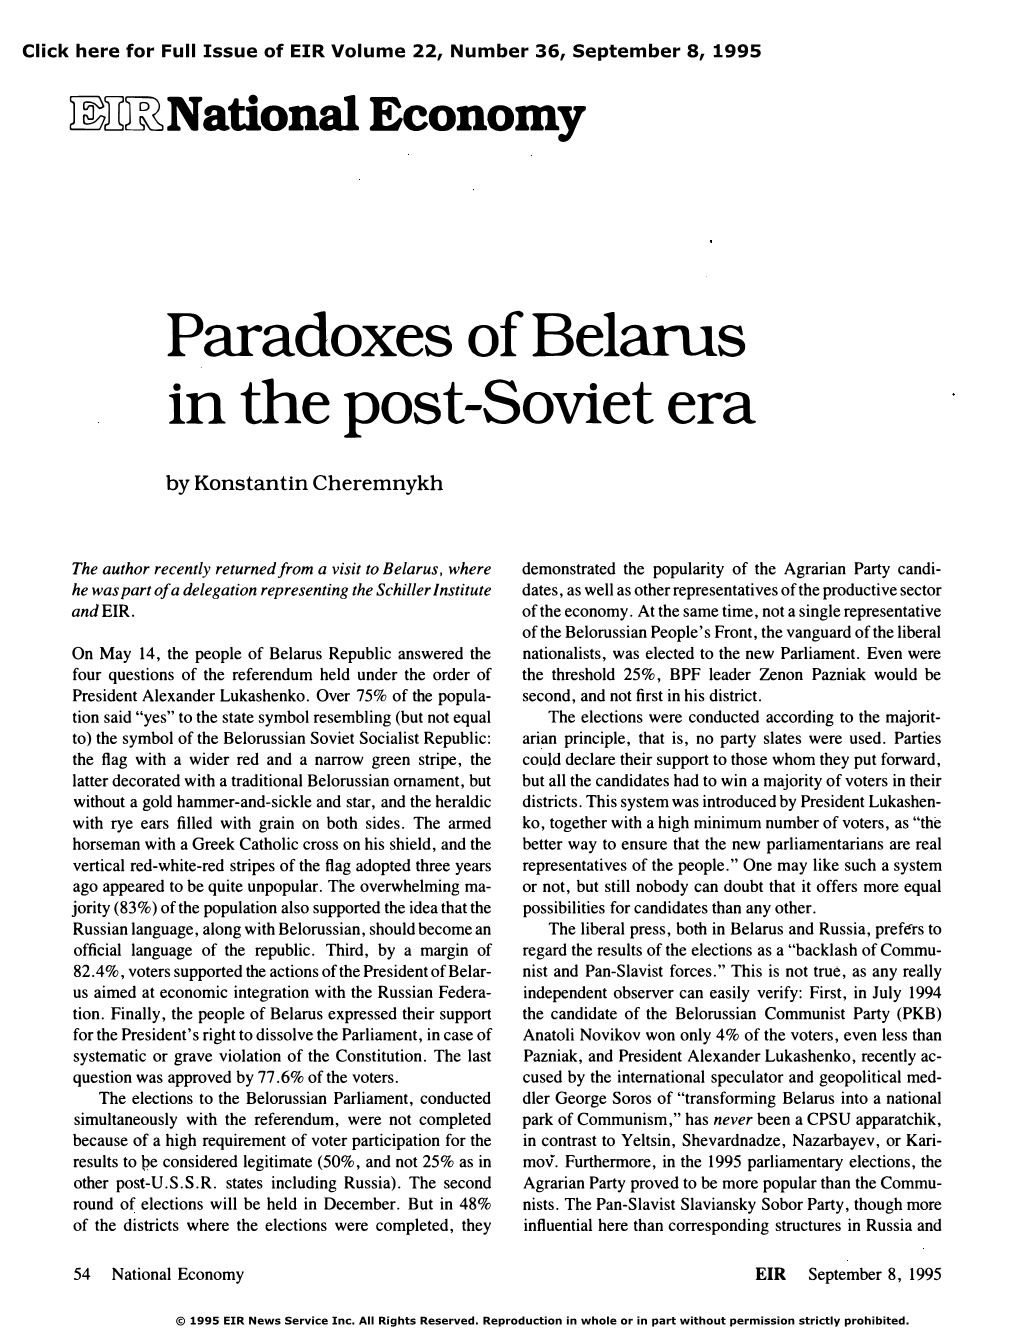 Paradoxes of Belarus in the Post-Soviet Era